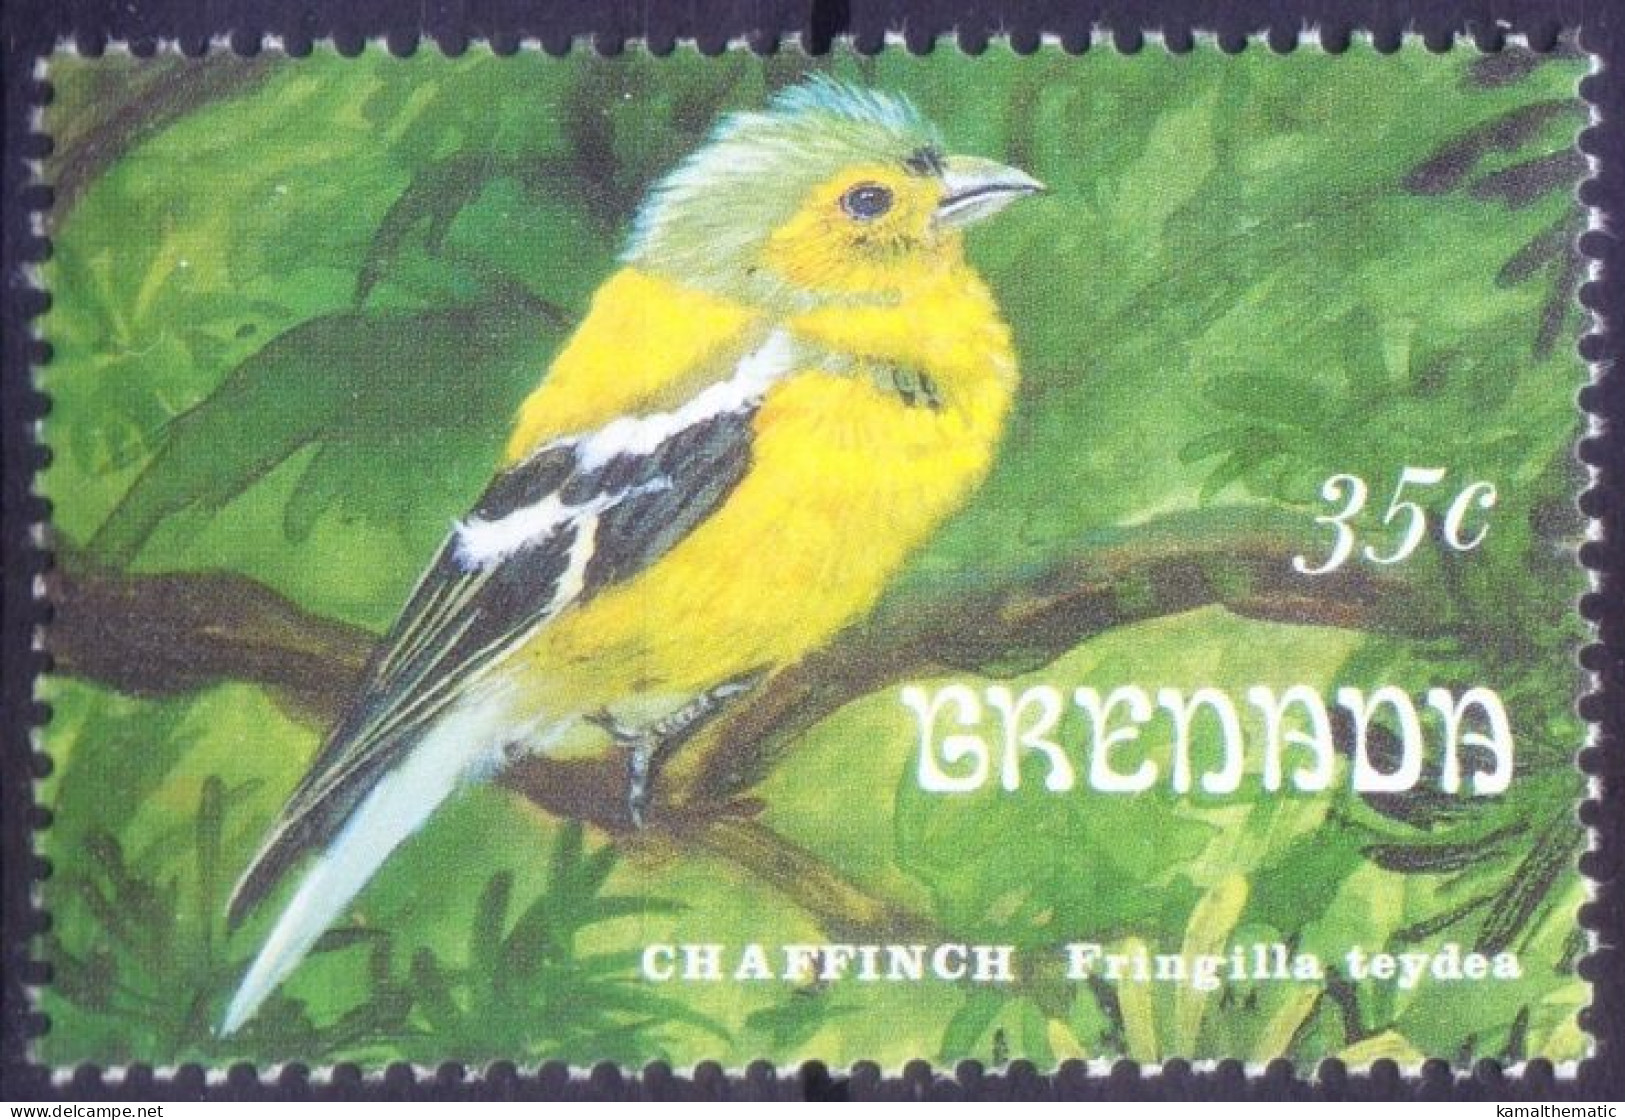 Common Chaffinch, Song Birds, Grenada 1993 MNH - - Songbirds & Tree Dwellers